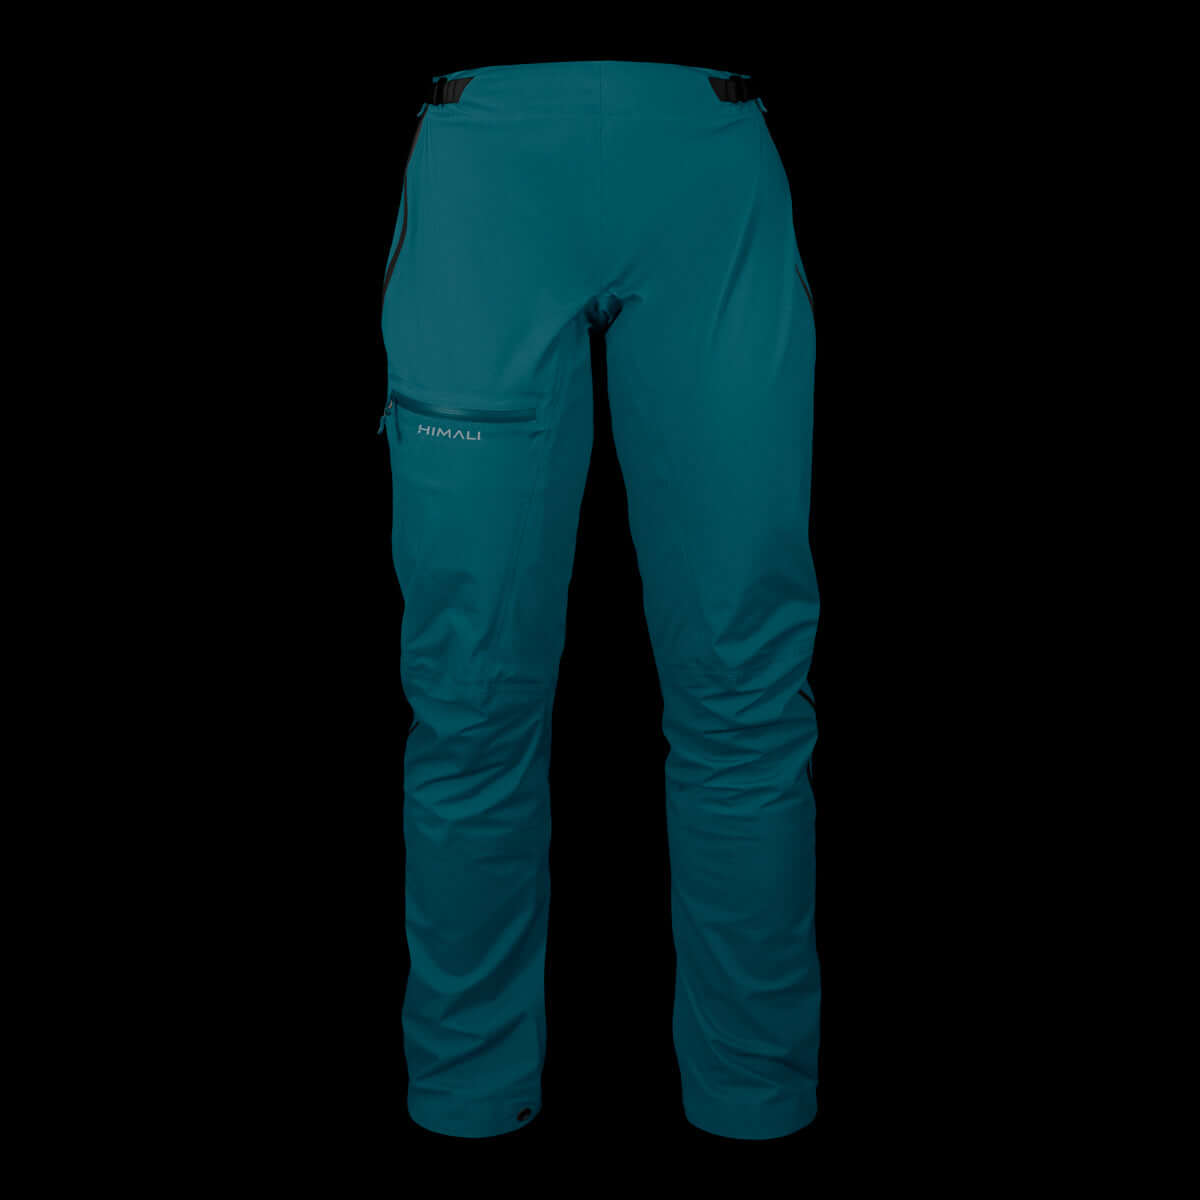 A product photo of the Women's Monsoon Hardshell 4-Season Waterproof pants in the color Electric Teal made of a 20K/20K Waterproof Breathable Membrane